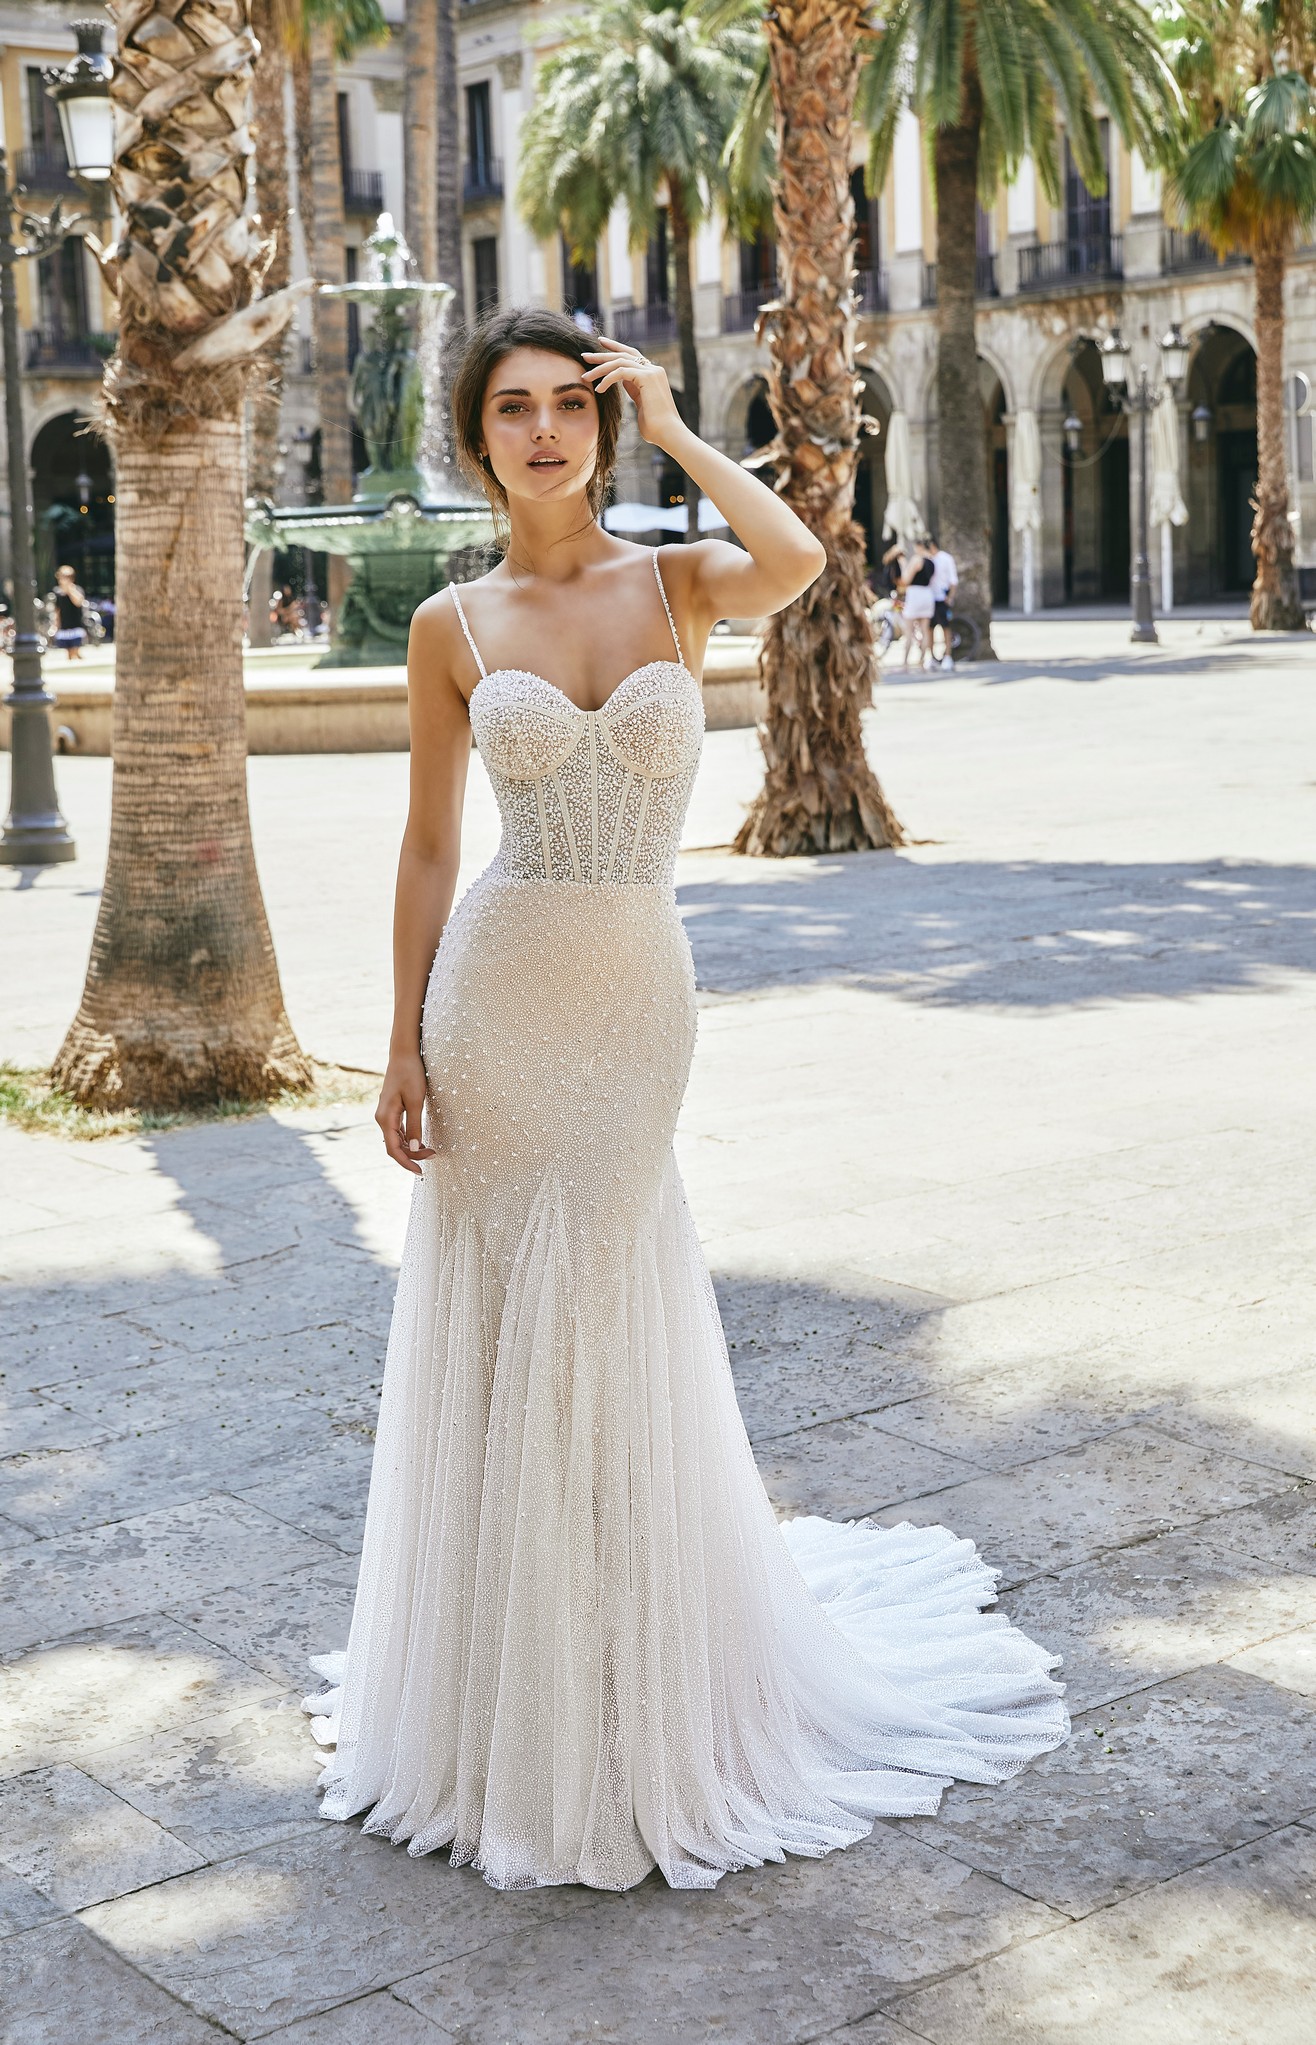 Model stood in Ronald Joyce style 69712, an exquisitely pearl-beaded fit and flare wedding dress in glitter tulle with delicate straps and a sweetheart neckline